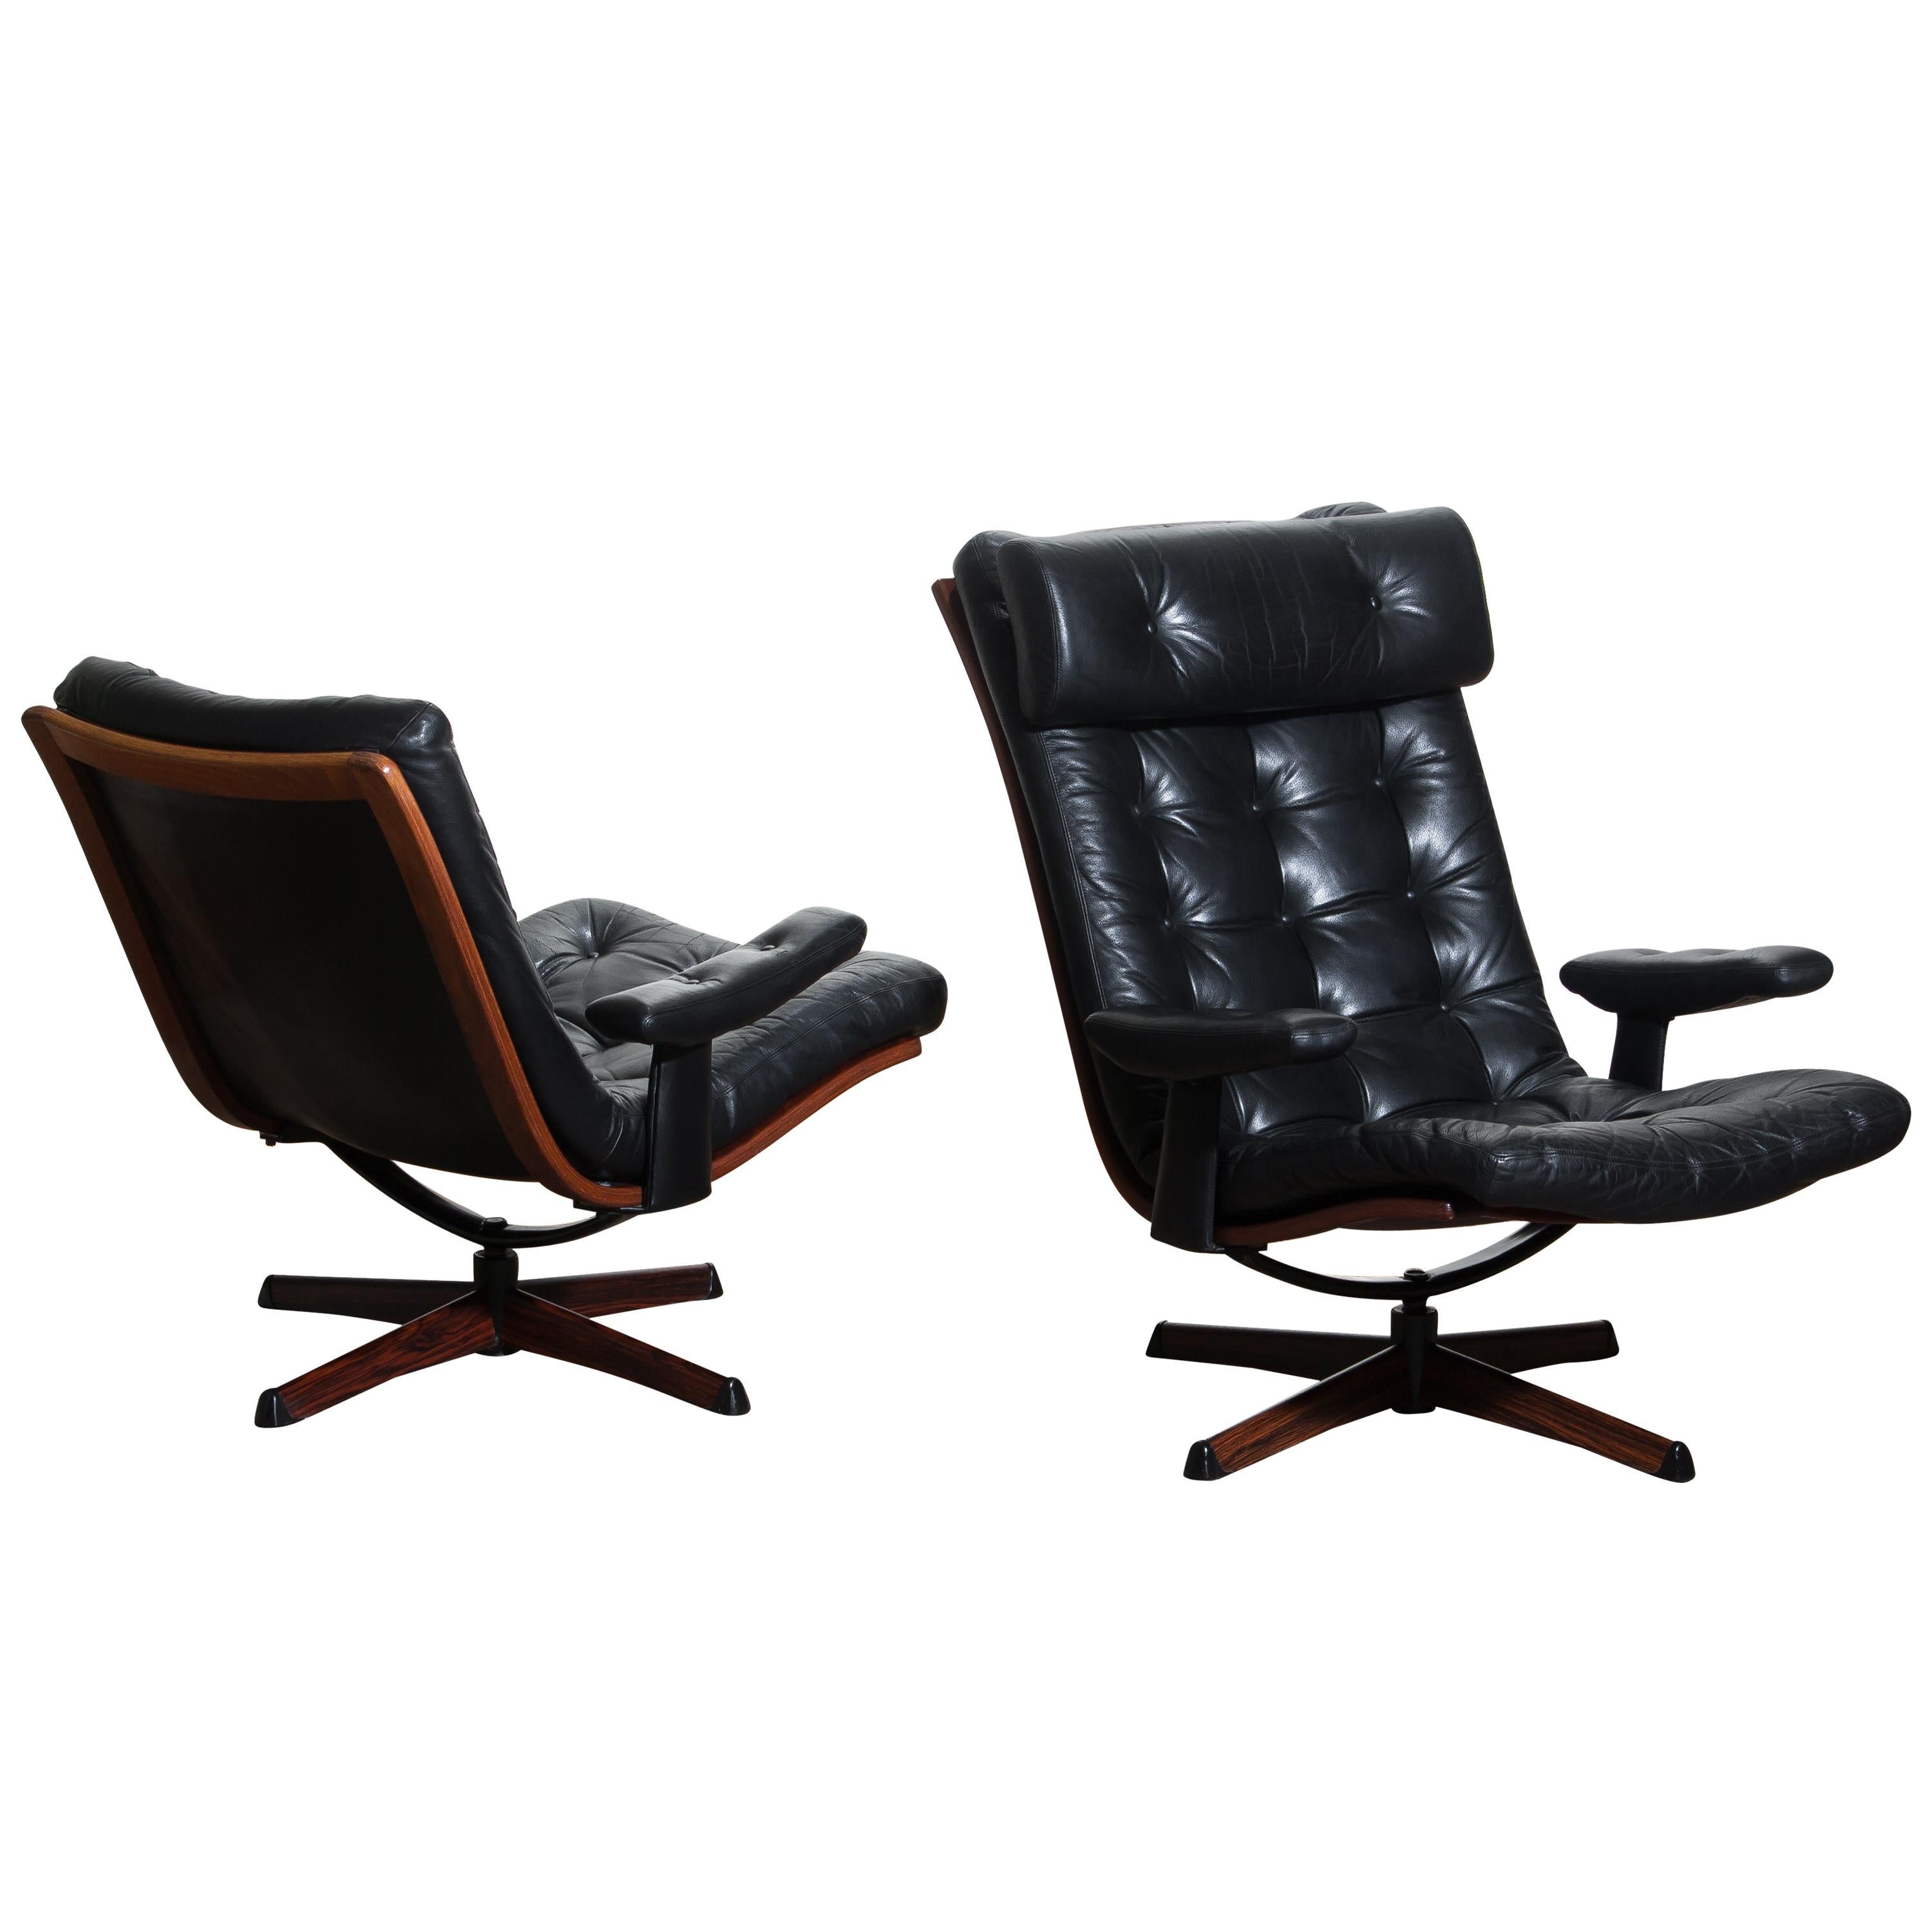 1960s Matching Pair of Black Leather Swivel Chairs by Gote Design Nassjo Sweden